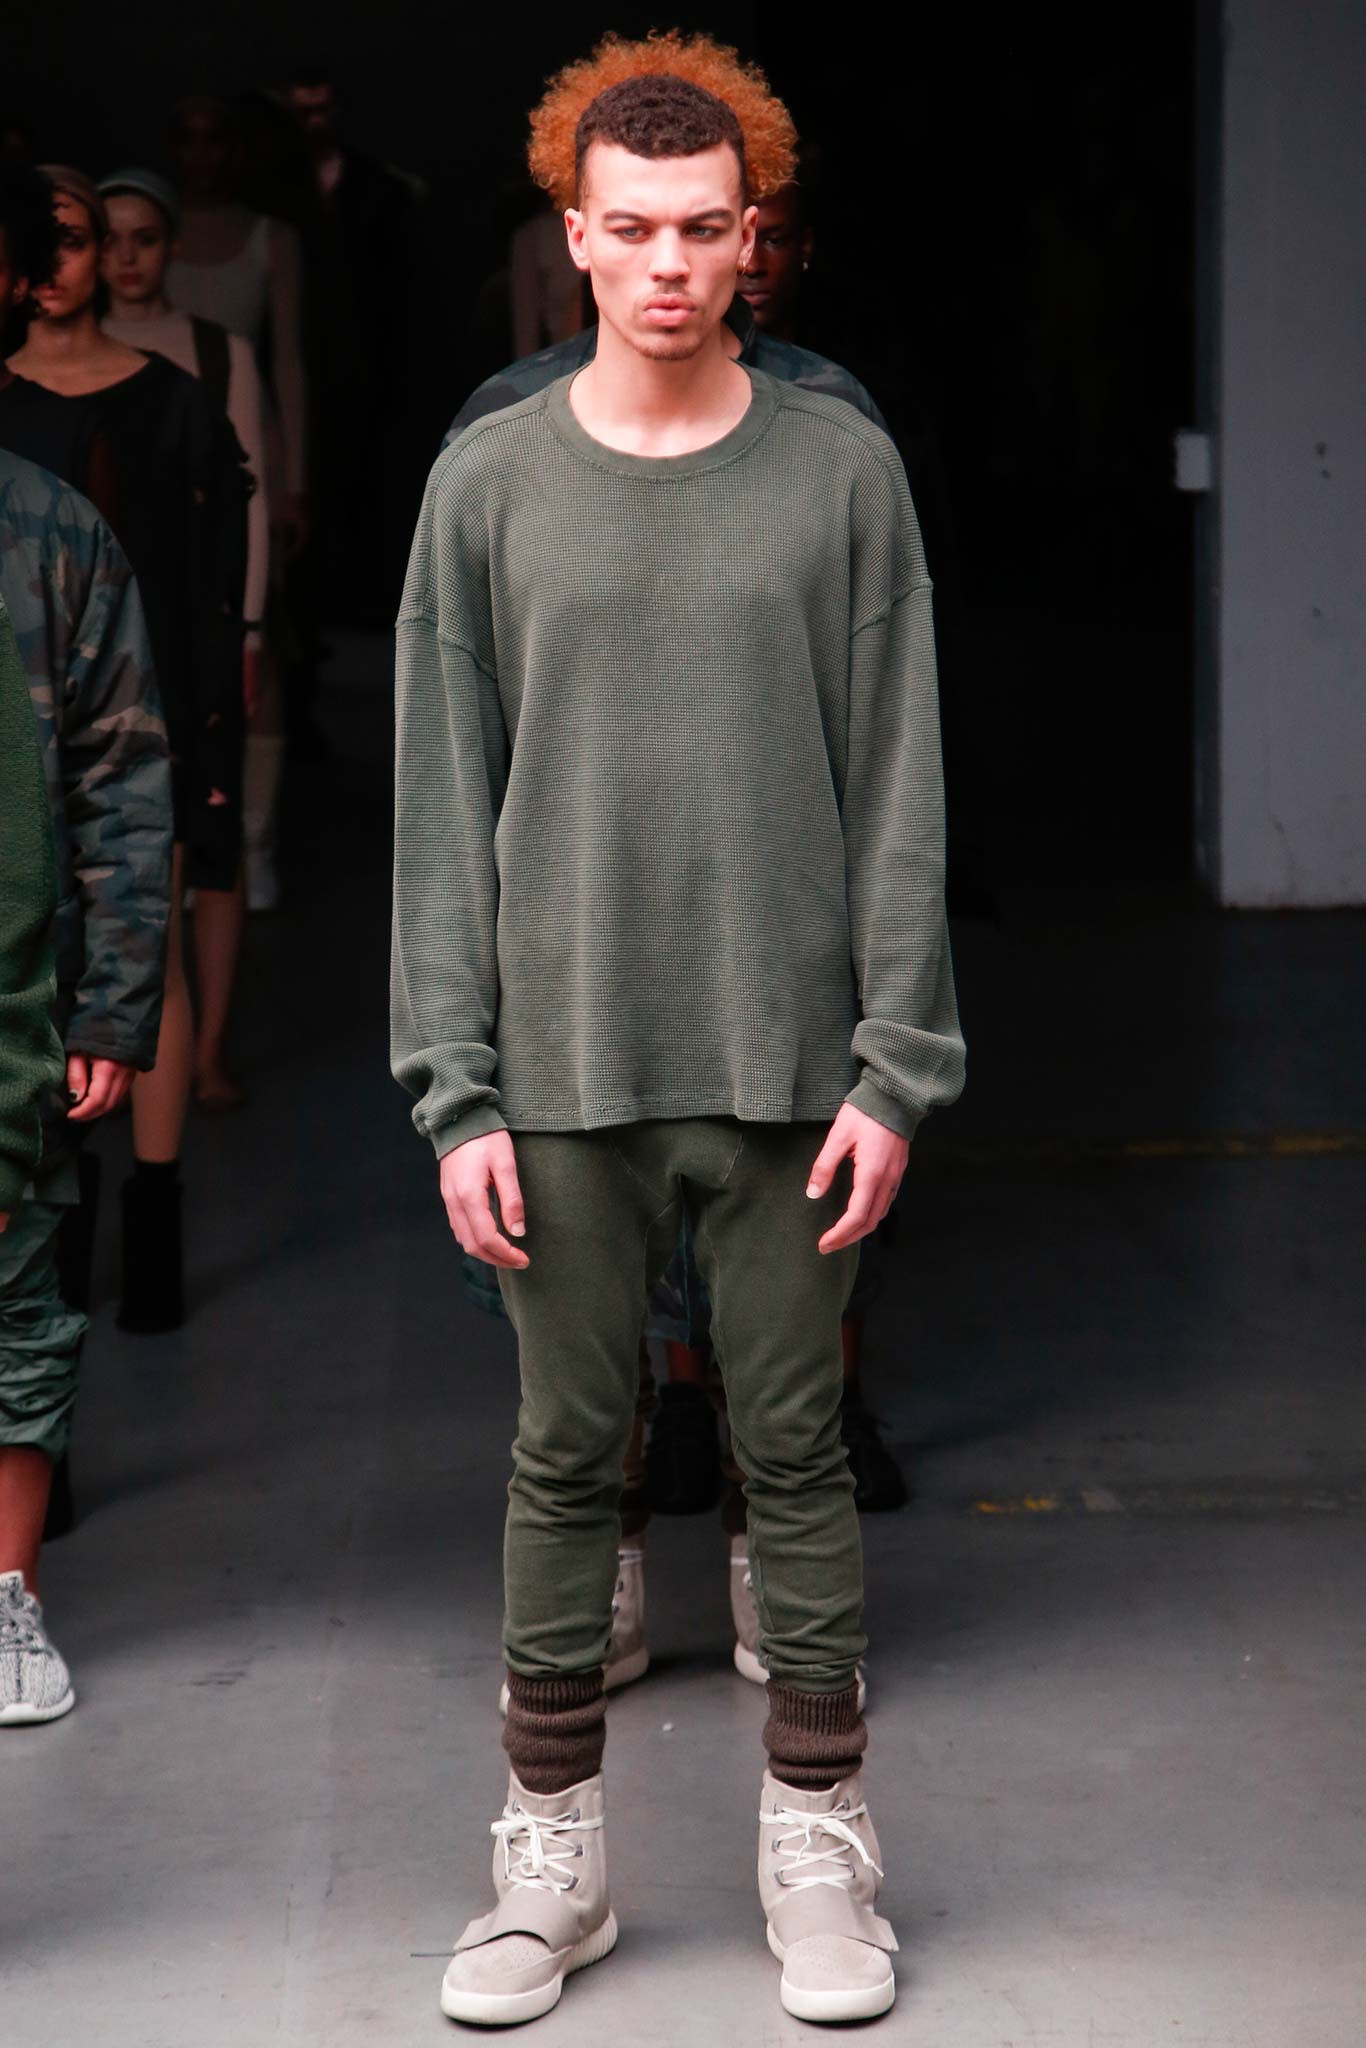 Kanye West Adidas Fall Winter 2015 Mens Collection Photos 005